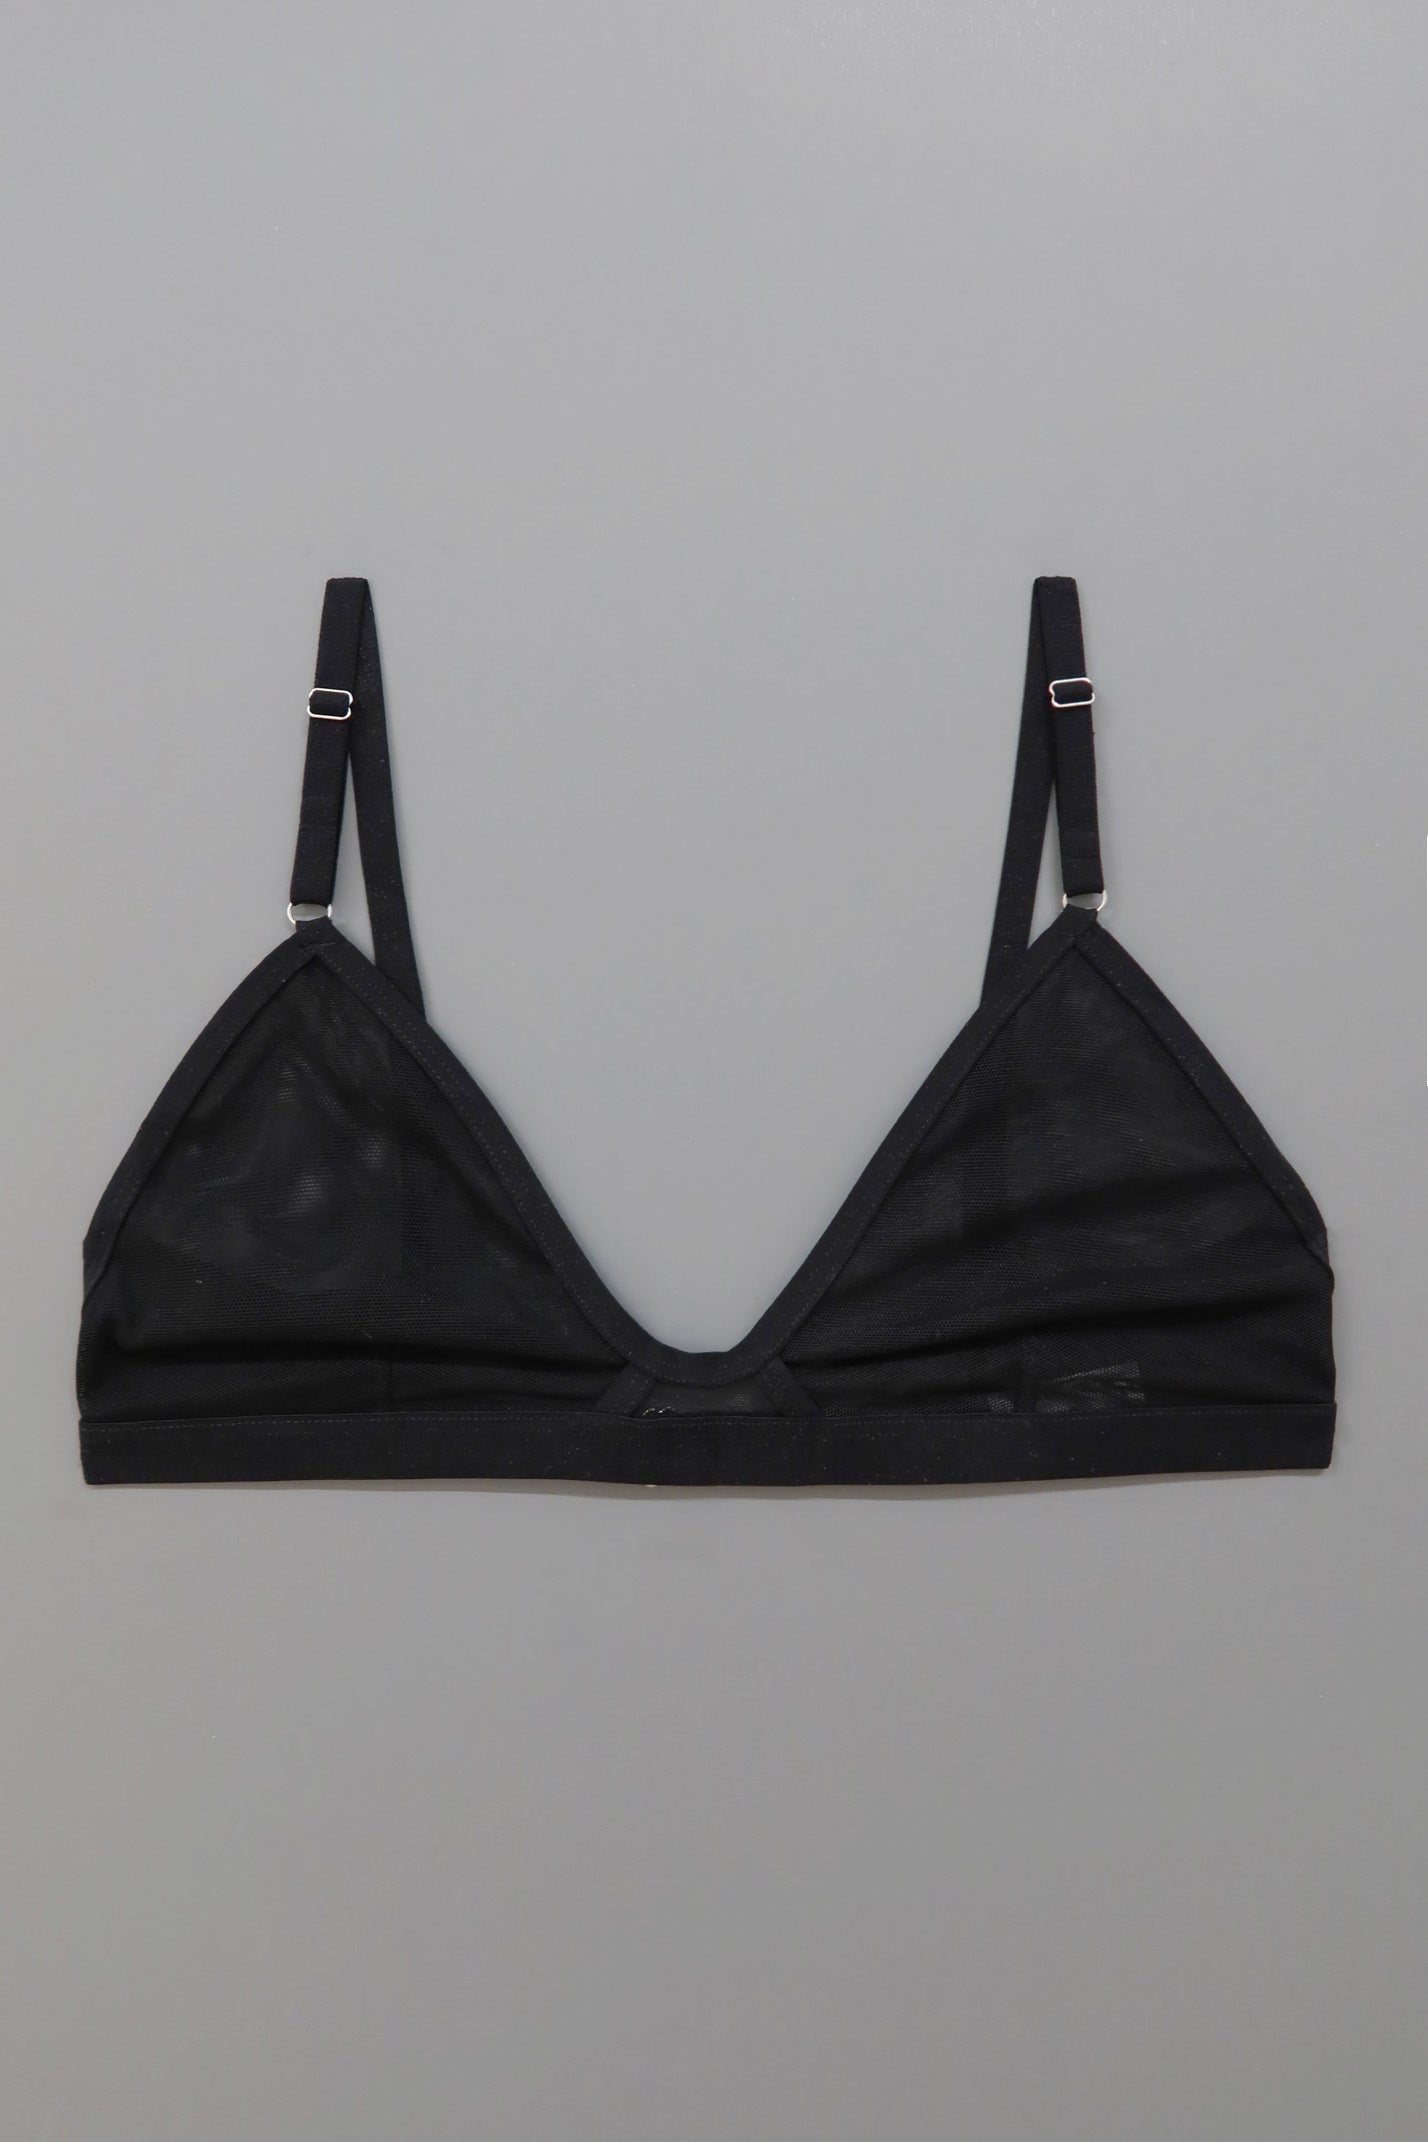 MARY YOUNG Emery Bra in Black  Ethical Canadian Made Lingerie